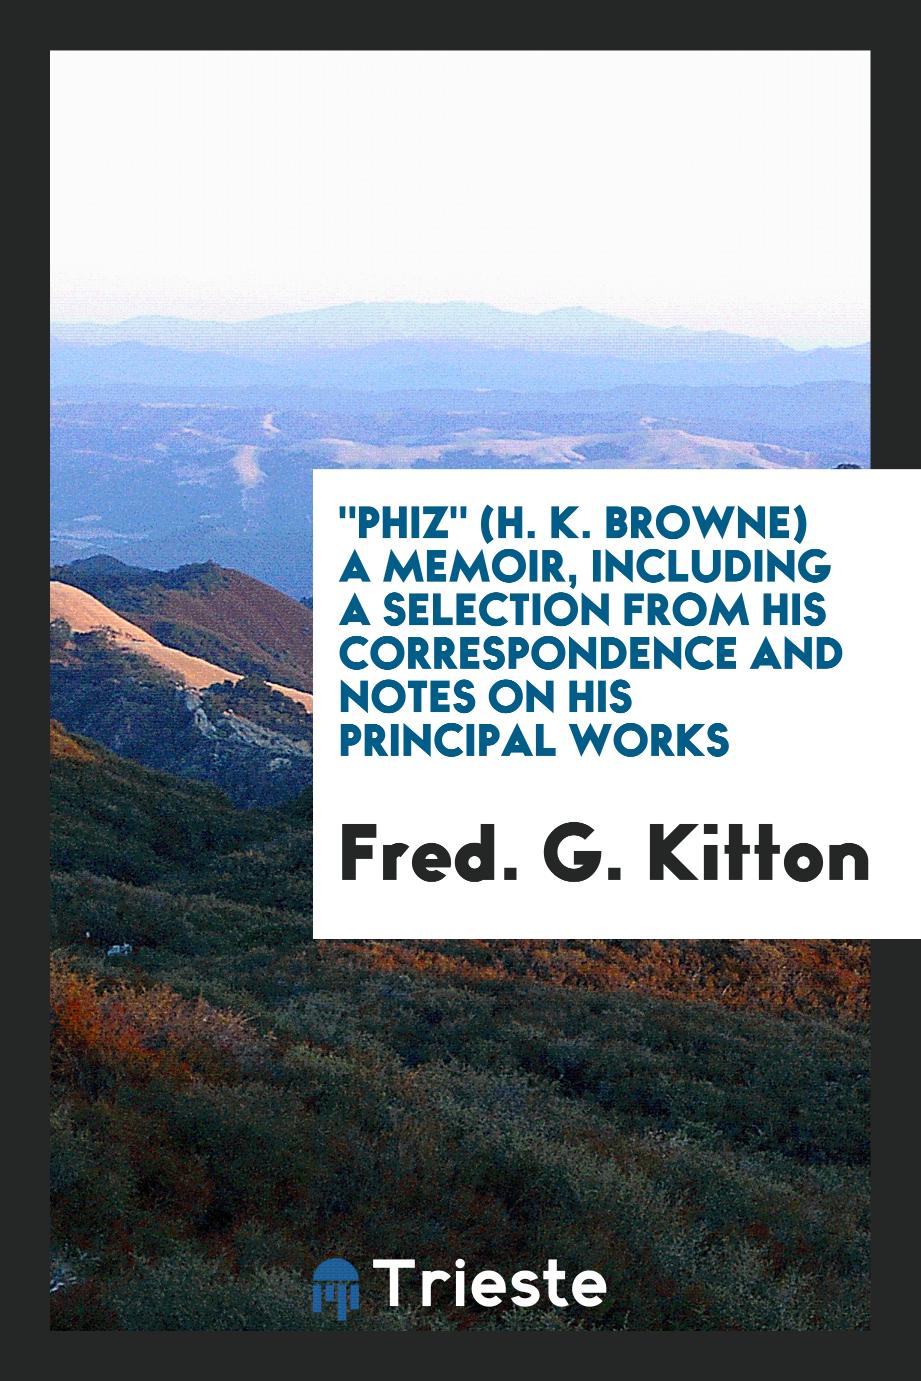 "Phiz" (H. K. Browne) a memoir, including a selection from his correspondence and notes on his principal works